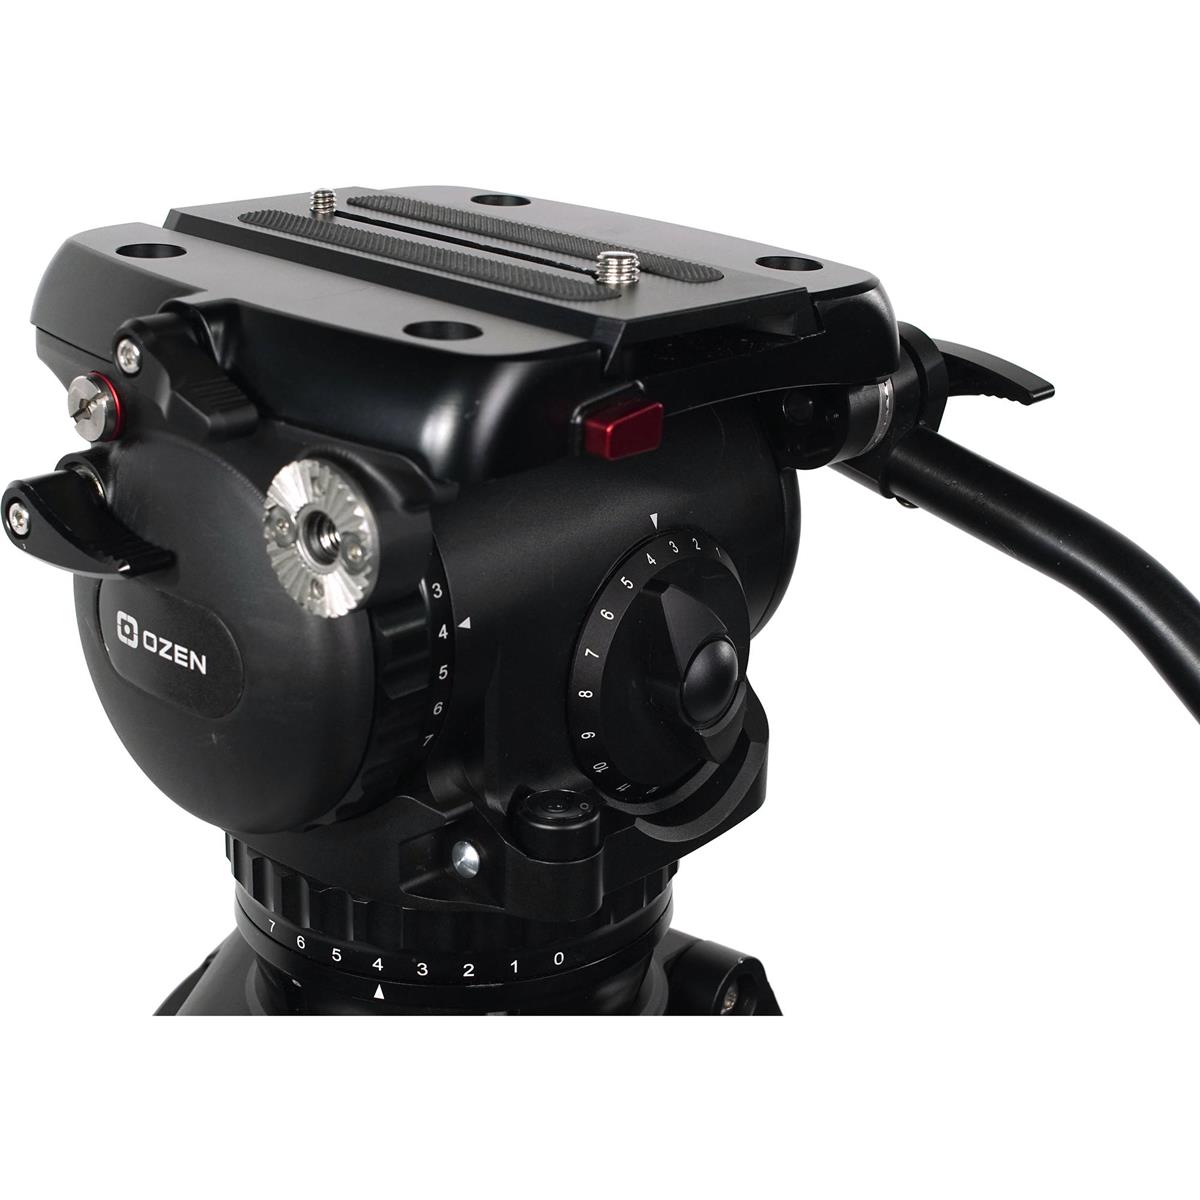 

OZEN AGILE 18S Fluid Head with S-LOC Camera Mounting Plate, 4.4-48.4 lb Payload